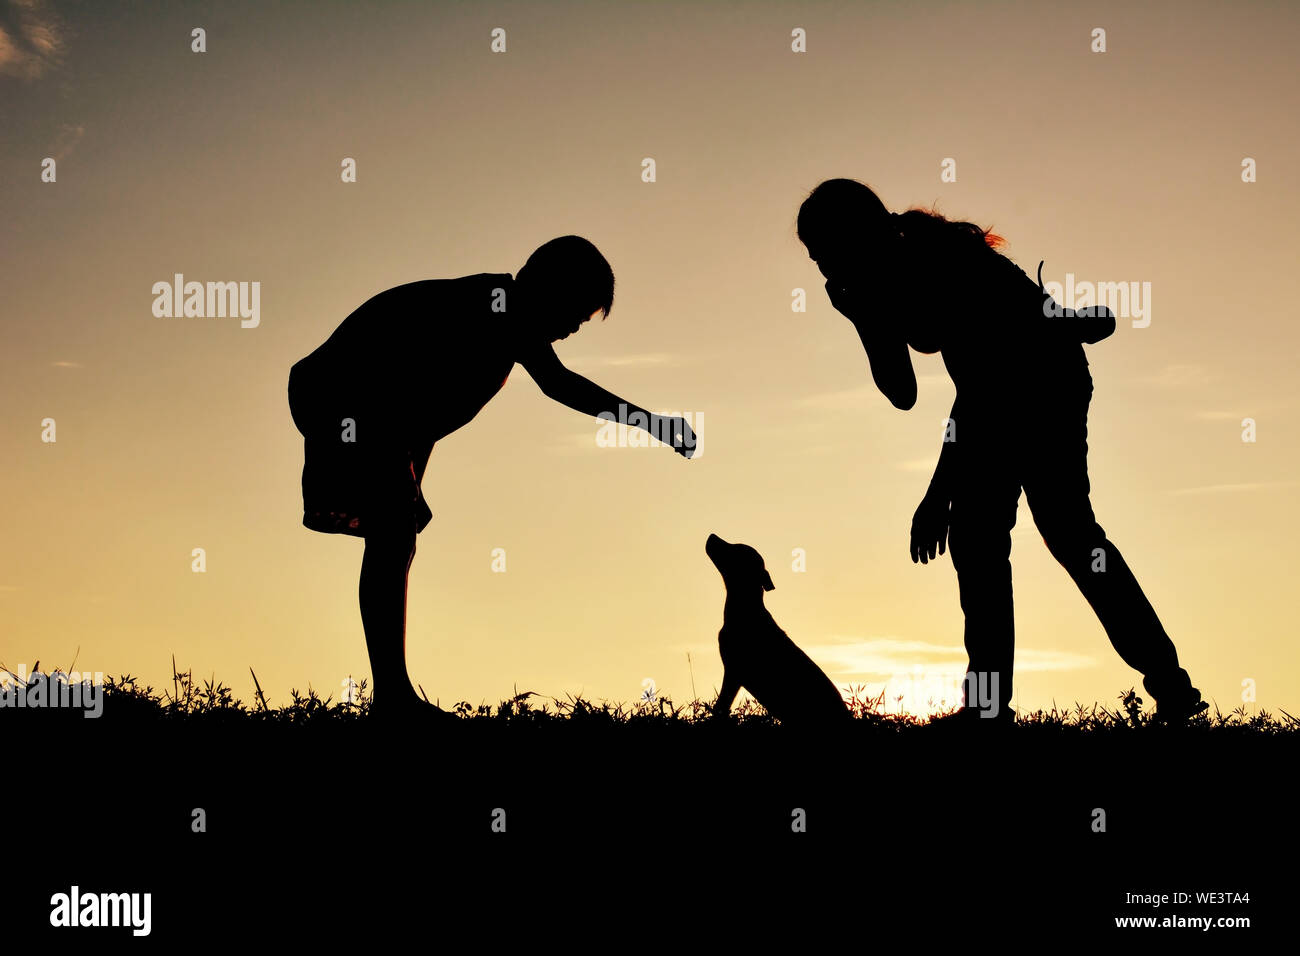 Silhouette Sibling Playing With Dog On Grassy Field Against Sky During Sunset Stock Photo